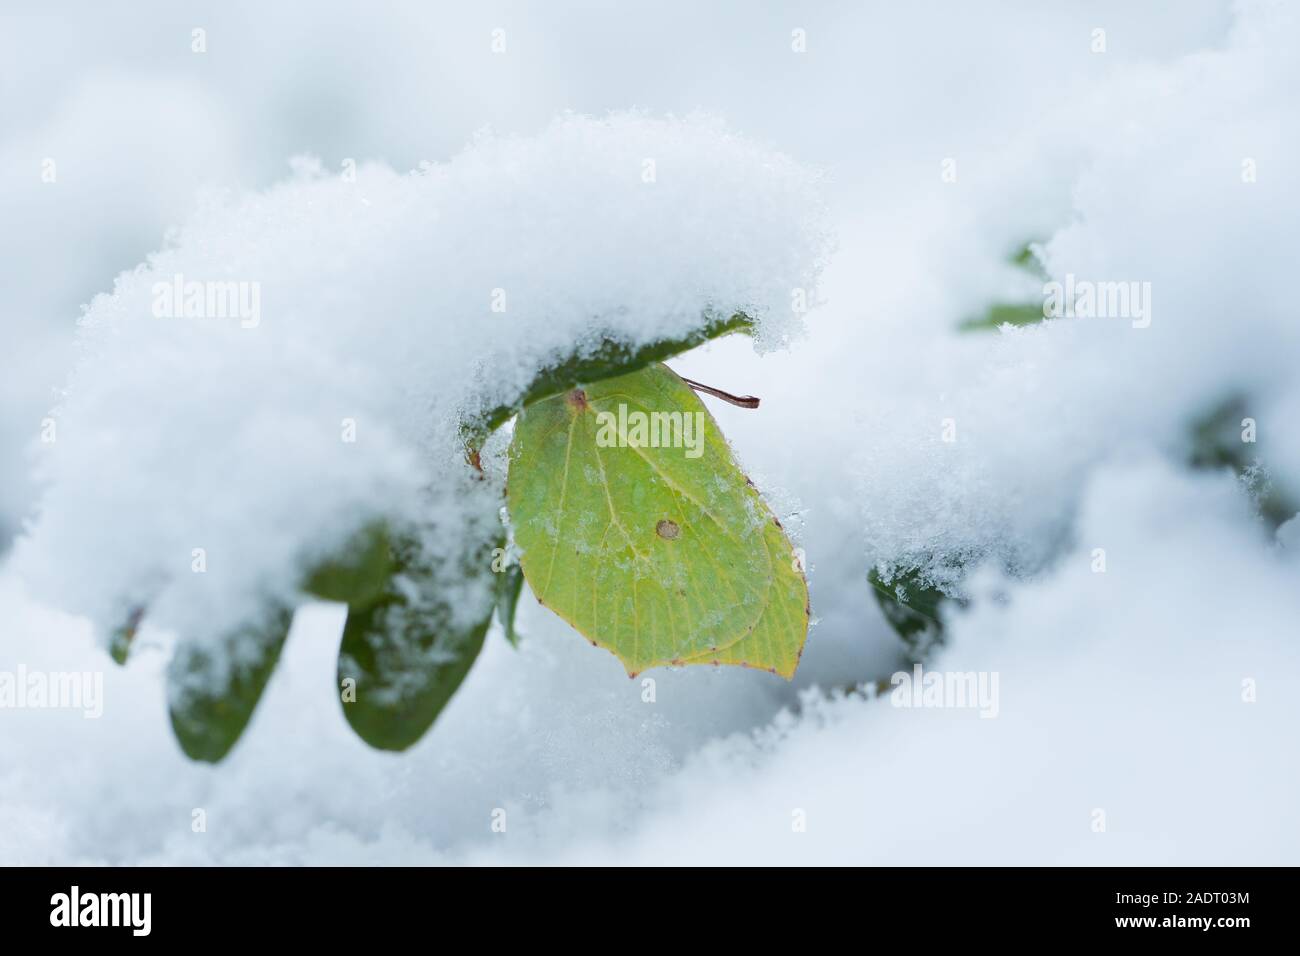 Brimstone in it's remarkable winter hibernation in a forest, Finland. Stock Photo